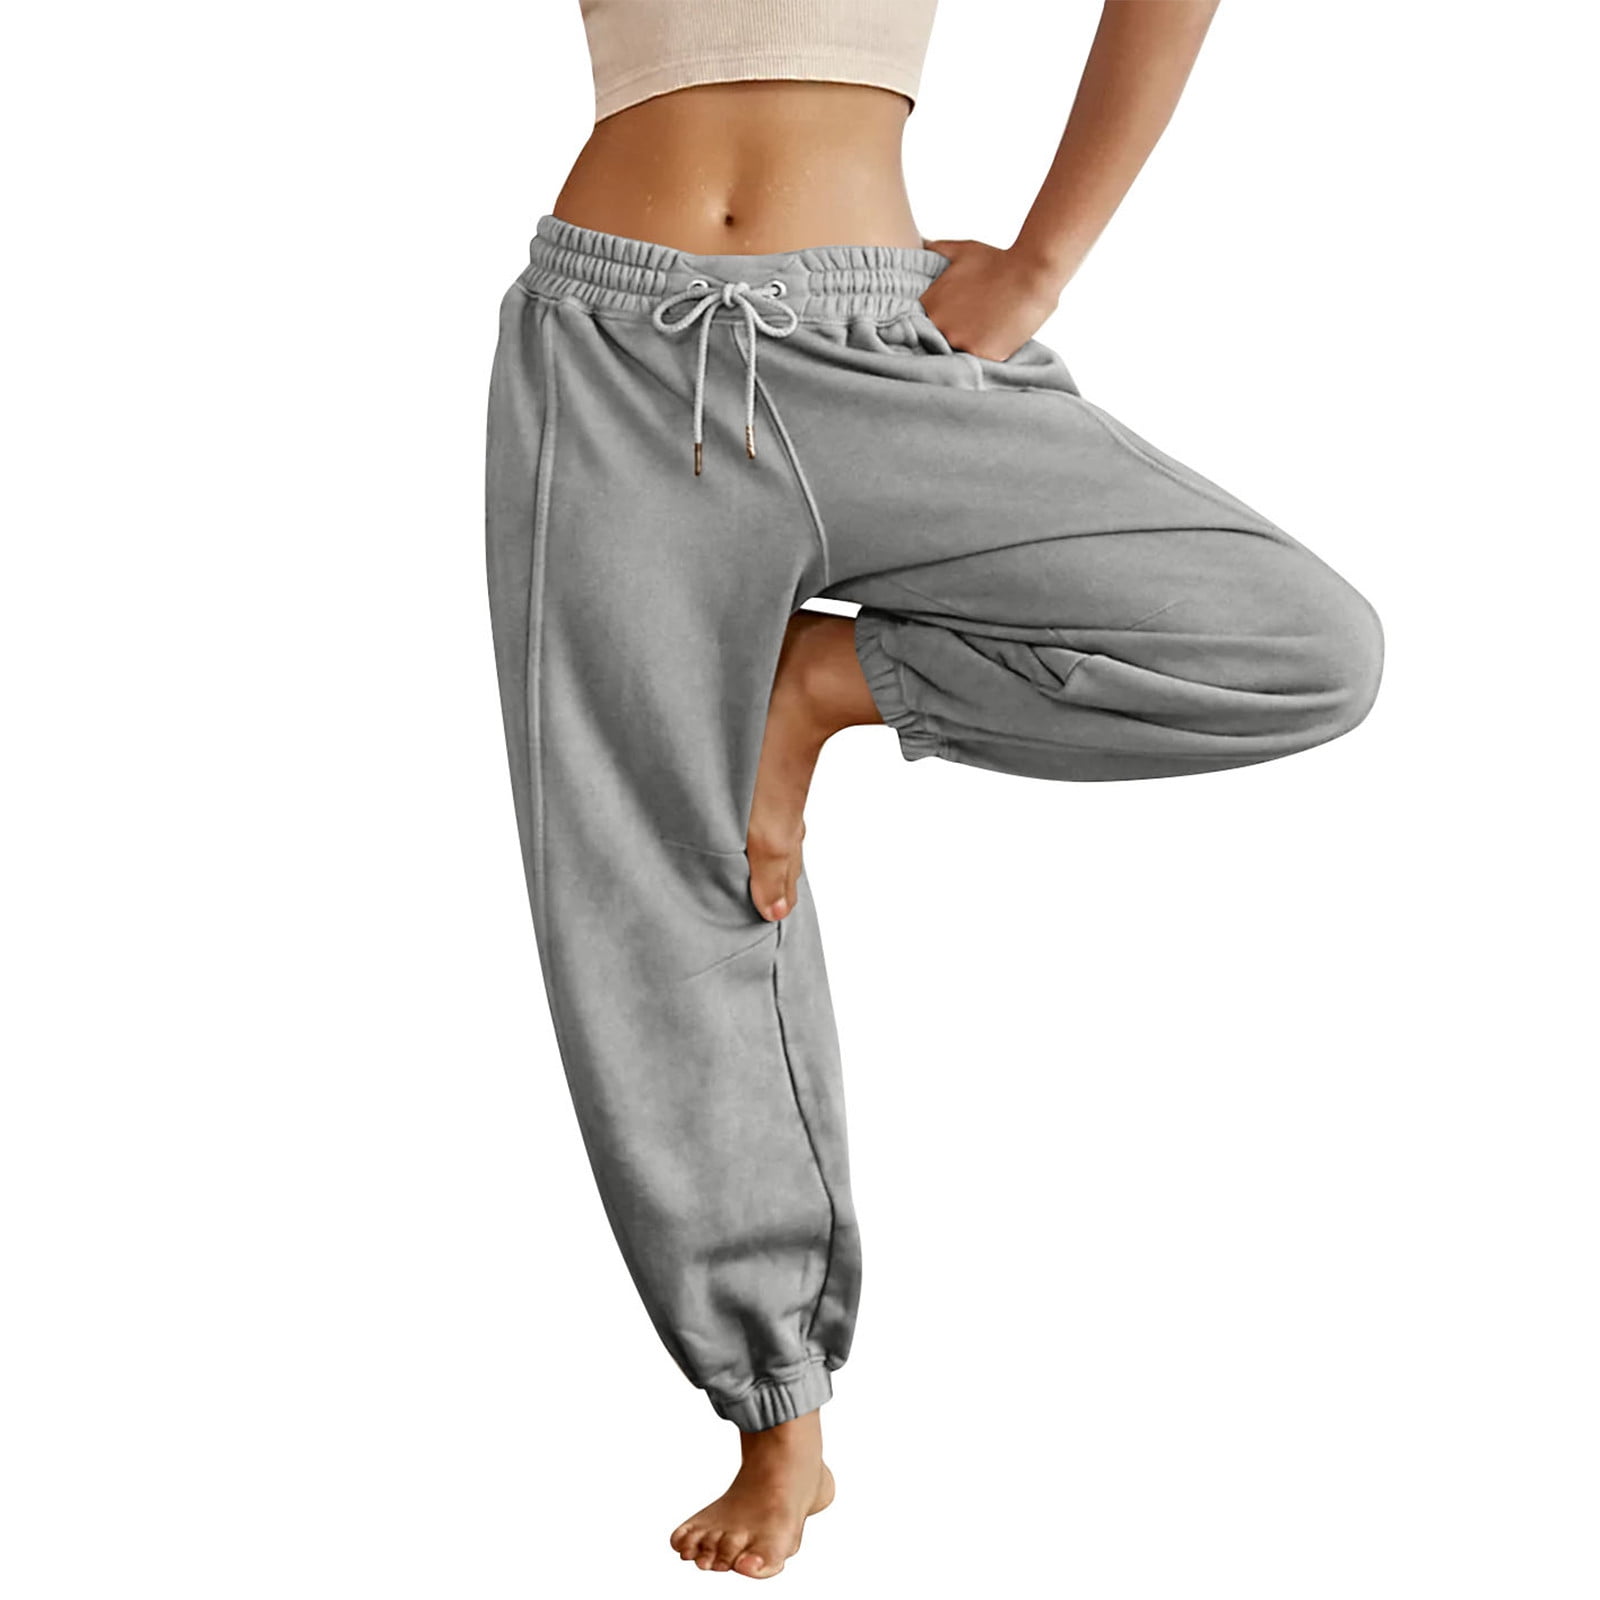 Parachute Pants for Women Women's Harem Pants High Waisted Workout Active  Joggers Pants Relaxed Fit Lightweight Pants with Pockets Sweat Pants Female  Yoga Pants Baggy Sweatpants for Women 